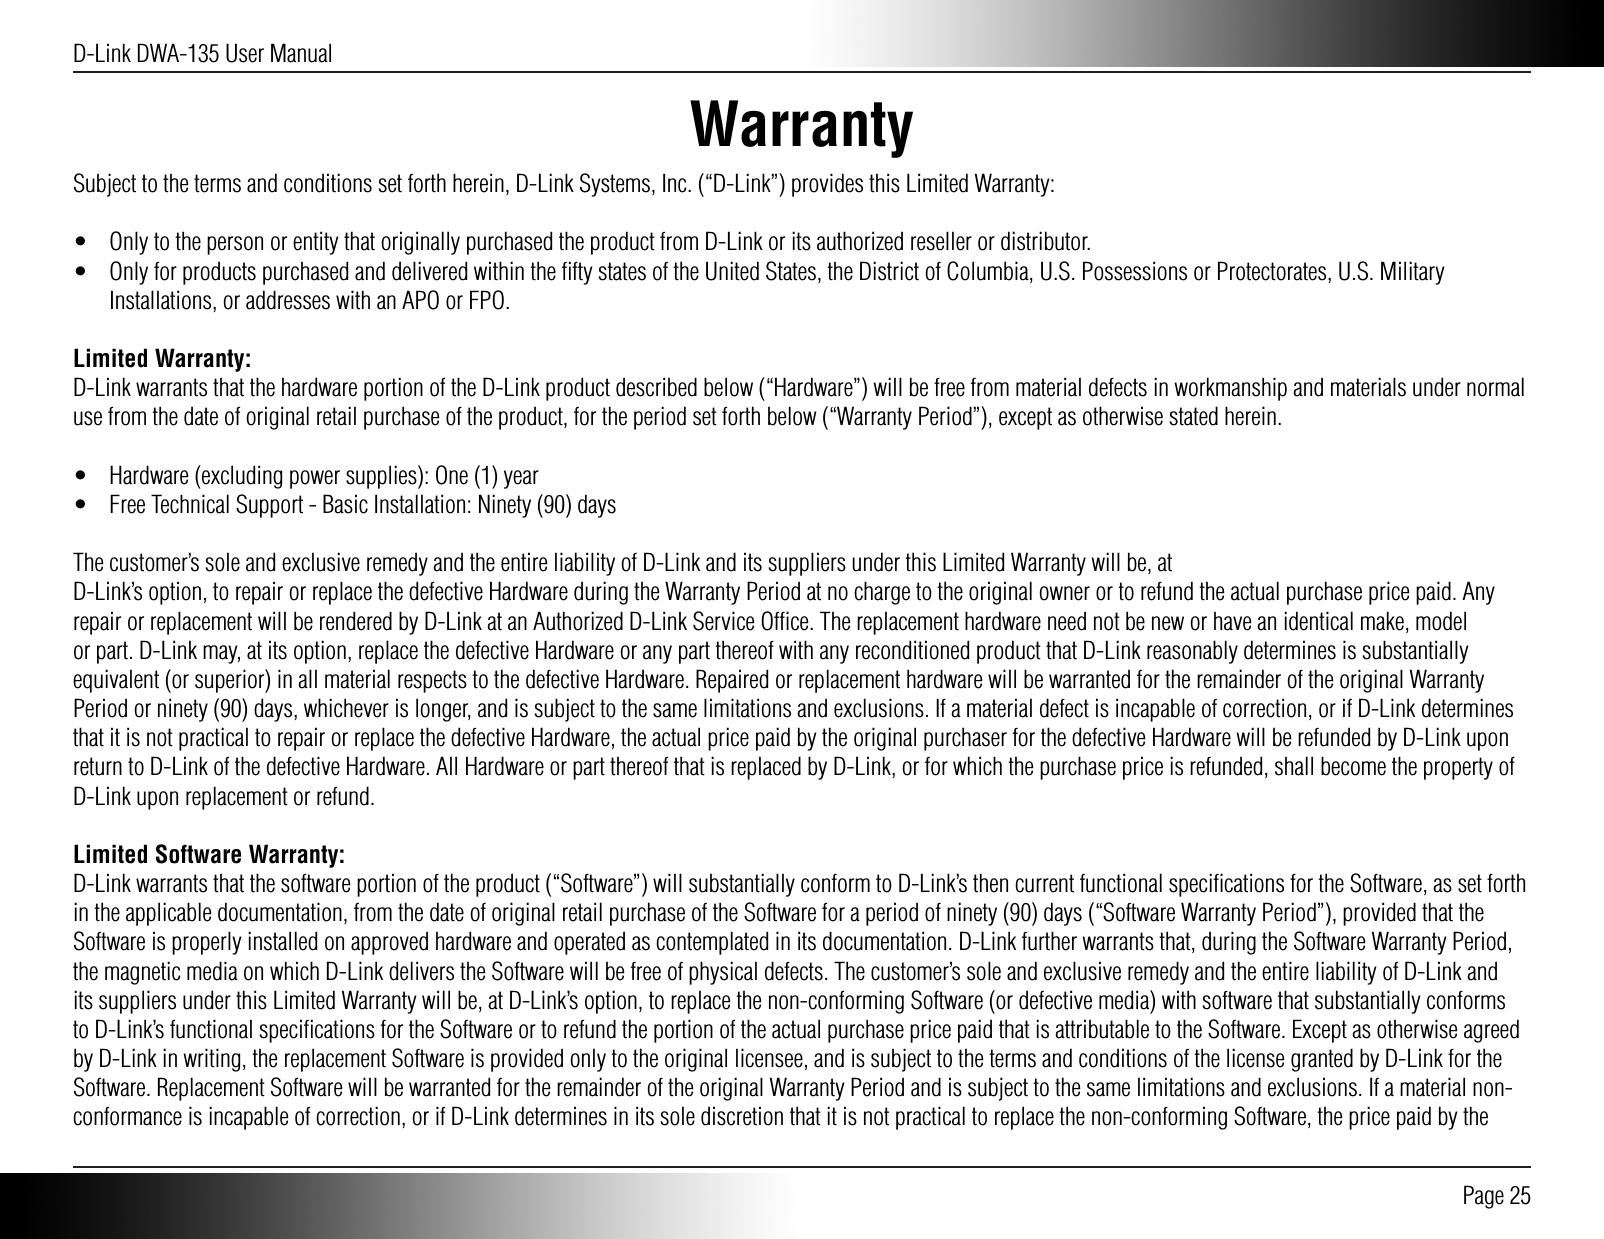 D-Link DWA-135 User Manual Page 25WarrantySubject to the terms and conditions set forth herein, D-Link Systems, Inc. (“D-Link”) provides this Limited Warranty:•  Only to the person or entity that originally purchased the product from D-Link or its authorized reseller or distributor.•  Only for products purchased and delivered within the ﬁfty states of the United States, the District of Columbia, U.S. Possessions or Protectorates, U.S. Military Installations, or addresses with an APO or FPO.Limited Warranty:D-Link warrants that the hardware portion of the D-Link product described below (“Hardware”) will be free from material defects in workmanship and materials under normal use from the date of original retail purchase of the product, for the period set forth below (“Warranty Period”), except as otherwise stated herein.•  Hardware (excluding power supplies): One (1) year•  Free Technical Support - Basic Installation: Ninety (90) daysThe customer’s sole and exclusive remedy and the entire liability of D-Link and its suppliers under this Limited Warranty will be, atD-Link’s option, to repair or replace the defective Hardware during the Warranty Period at no charge to the original owner or to refund the actual purchase price paid. Any repair or replacement will be rendered by D-Link at an Authorized D-Link Service Ofﬁce. The replacement hardware need not be new or have an identical make, model or part. D-Link may, at its option, replace the defective Hardware or any part thereof with any reconditioned product that D-Link reasonably determines is substantially equivalent (or superior) in all material respects to the defective Hardware. Repaired or replacement hardware will be warranted for the remainder of the original Warranty Period or ninety (90) days, whichever is longer, and is subject to the same limitations and exclusions. If a material defect is incapable of correction, or if D-Link determines that it is not practical to repair or replace the defective Hardware, the actual price paid by the original purchaser for the defective Hardware will be refunded by D-Link upon return to D-Link of the defective Hardware. All Hardware or part thereof that is replaced by D-Link, or for which the purchase price is refunded, shall become the property of D-Link upon replacement or refund.Limited Software Warranty:D-Link warrants that the software portion of the product (“Software”) will substantially conform to D-Link’s then current functional speciﬁcations for the Software, as set forth in the applicable documentation, from the date of original retail purchase of the Software for a period of ninety (90) days (“Software Warranty Period”), provided that the Software is properly installed on approved hardware and operated as contemplated in its documentation. D-Link further warrants that, during the Software Warranty Period, the magnetic media on which D-Link delivers the Software will be free of physical defects. The customer’s sole and exclusive remedy and the entire liability of D-Link and its suppliers under this Limited Warranty will be, at D-Link’s option, to replace the non-conforming Software (or defective media) with software that substantially conforms to D-Link’s functional speciﬁcations for the Software or to refund the portion of the actual purchase price paid that is attributable to the Software. Except as otherwise agreed by D-Link in writing, the replacement Software is provided only to the original licensee, and is subject to the terms and conditions of the license granted by D-Link for the Software. Replacement Software will be warranted for the remainder of the original Warranty Period and is subject to the same limitations and exclusions. If a material non-conformance is incapable of correction, or if D-Link determines in its sole discretion that it is not practical to replace the non-conforming Software, the price paid by the